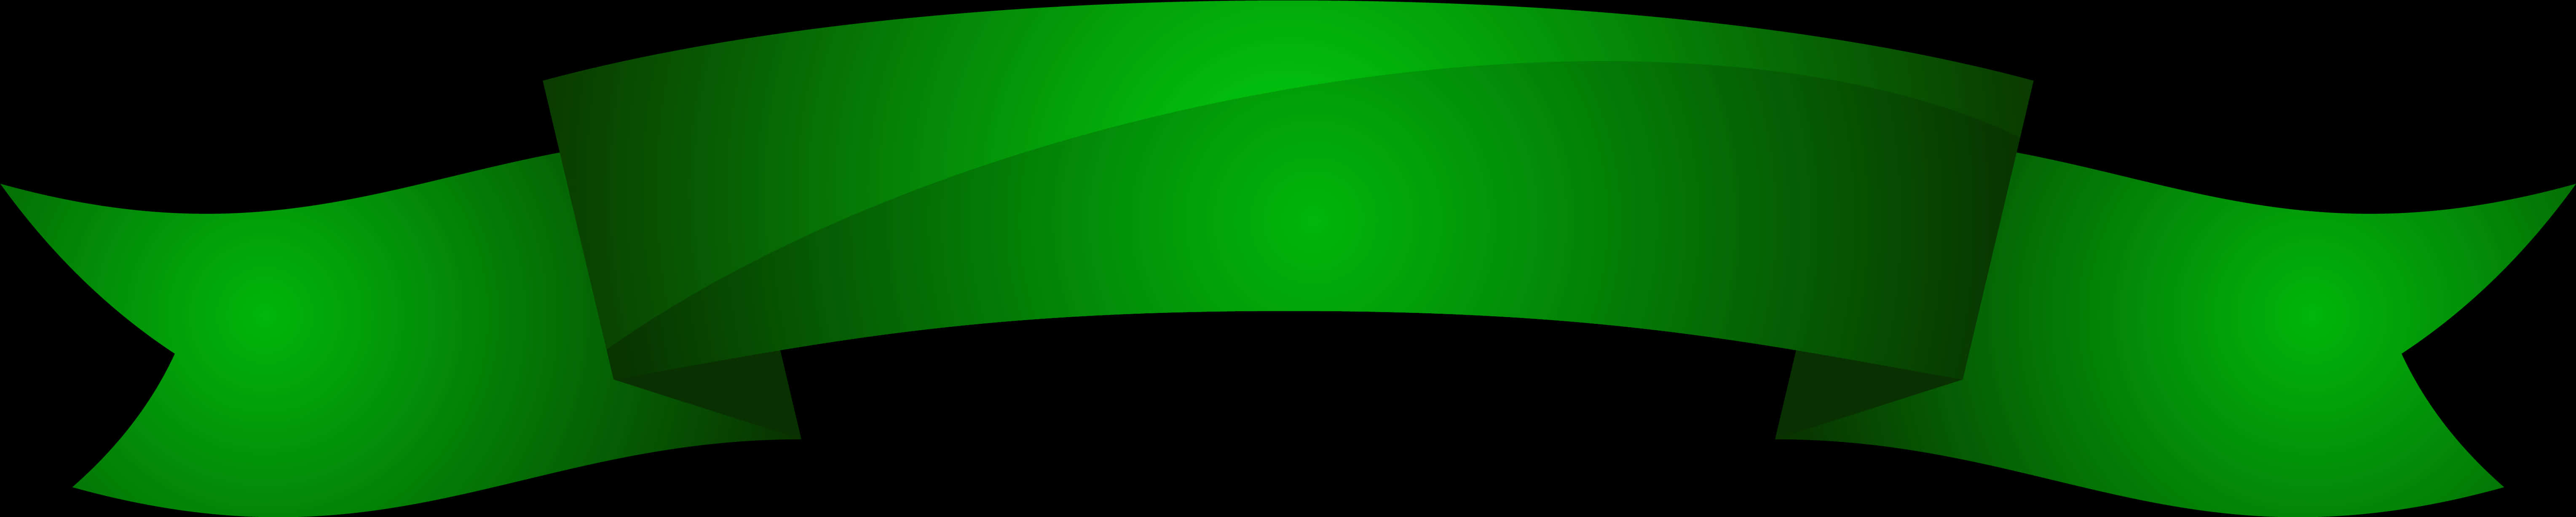 Green Banner Ribbon Graphic PNG